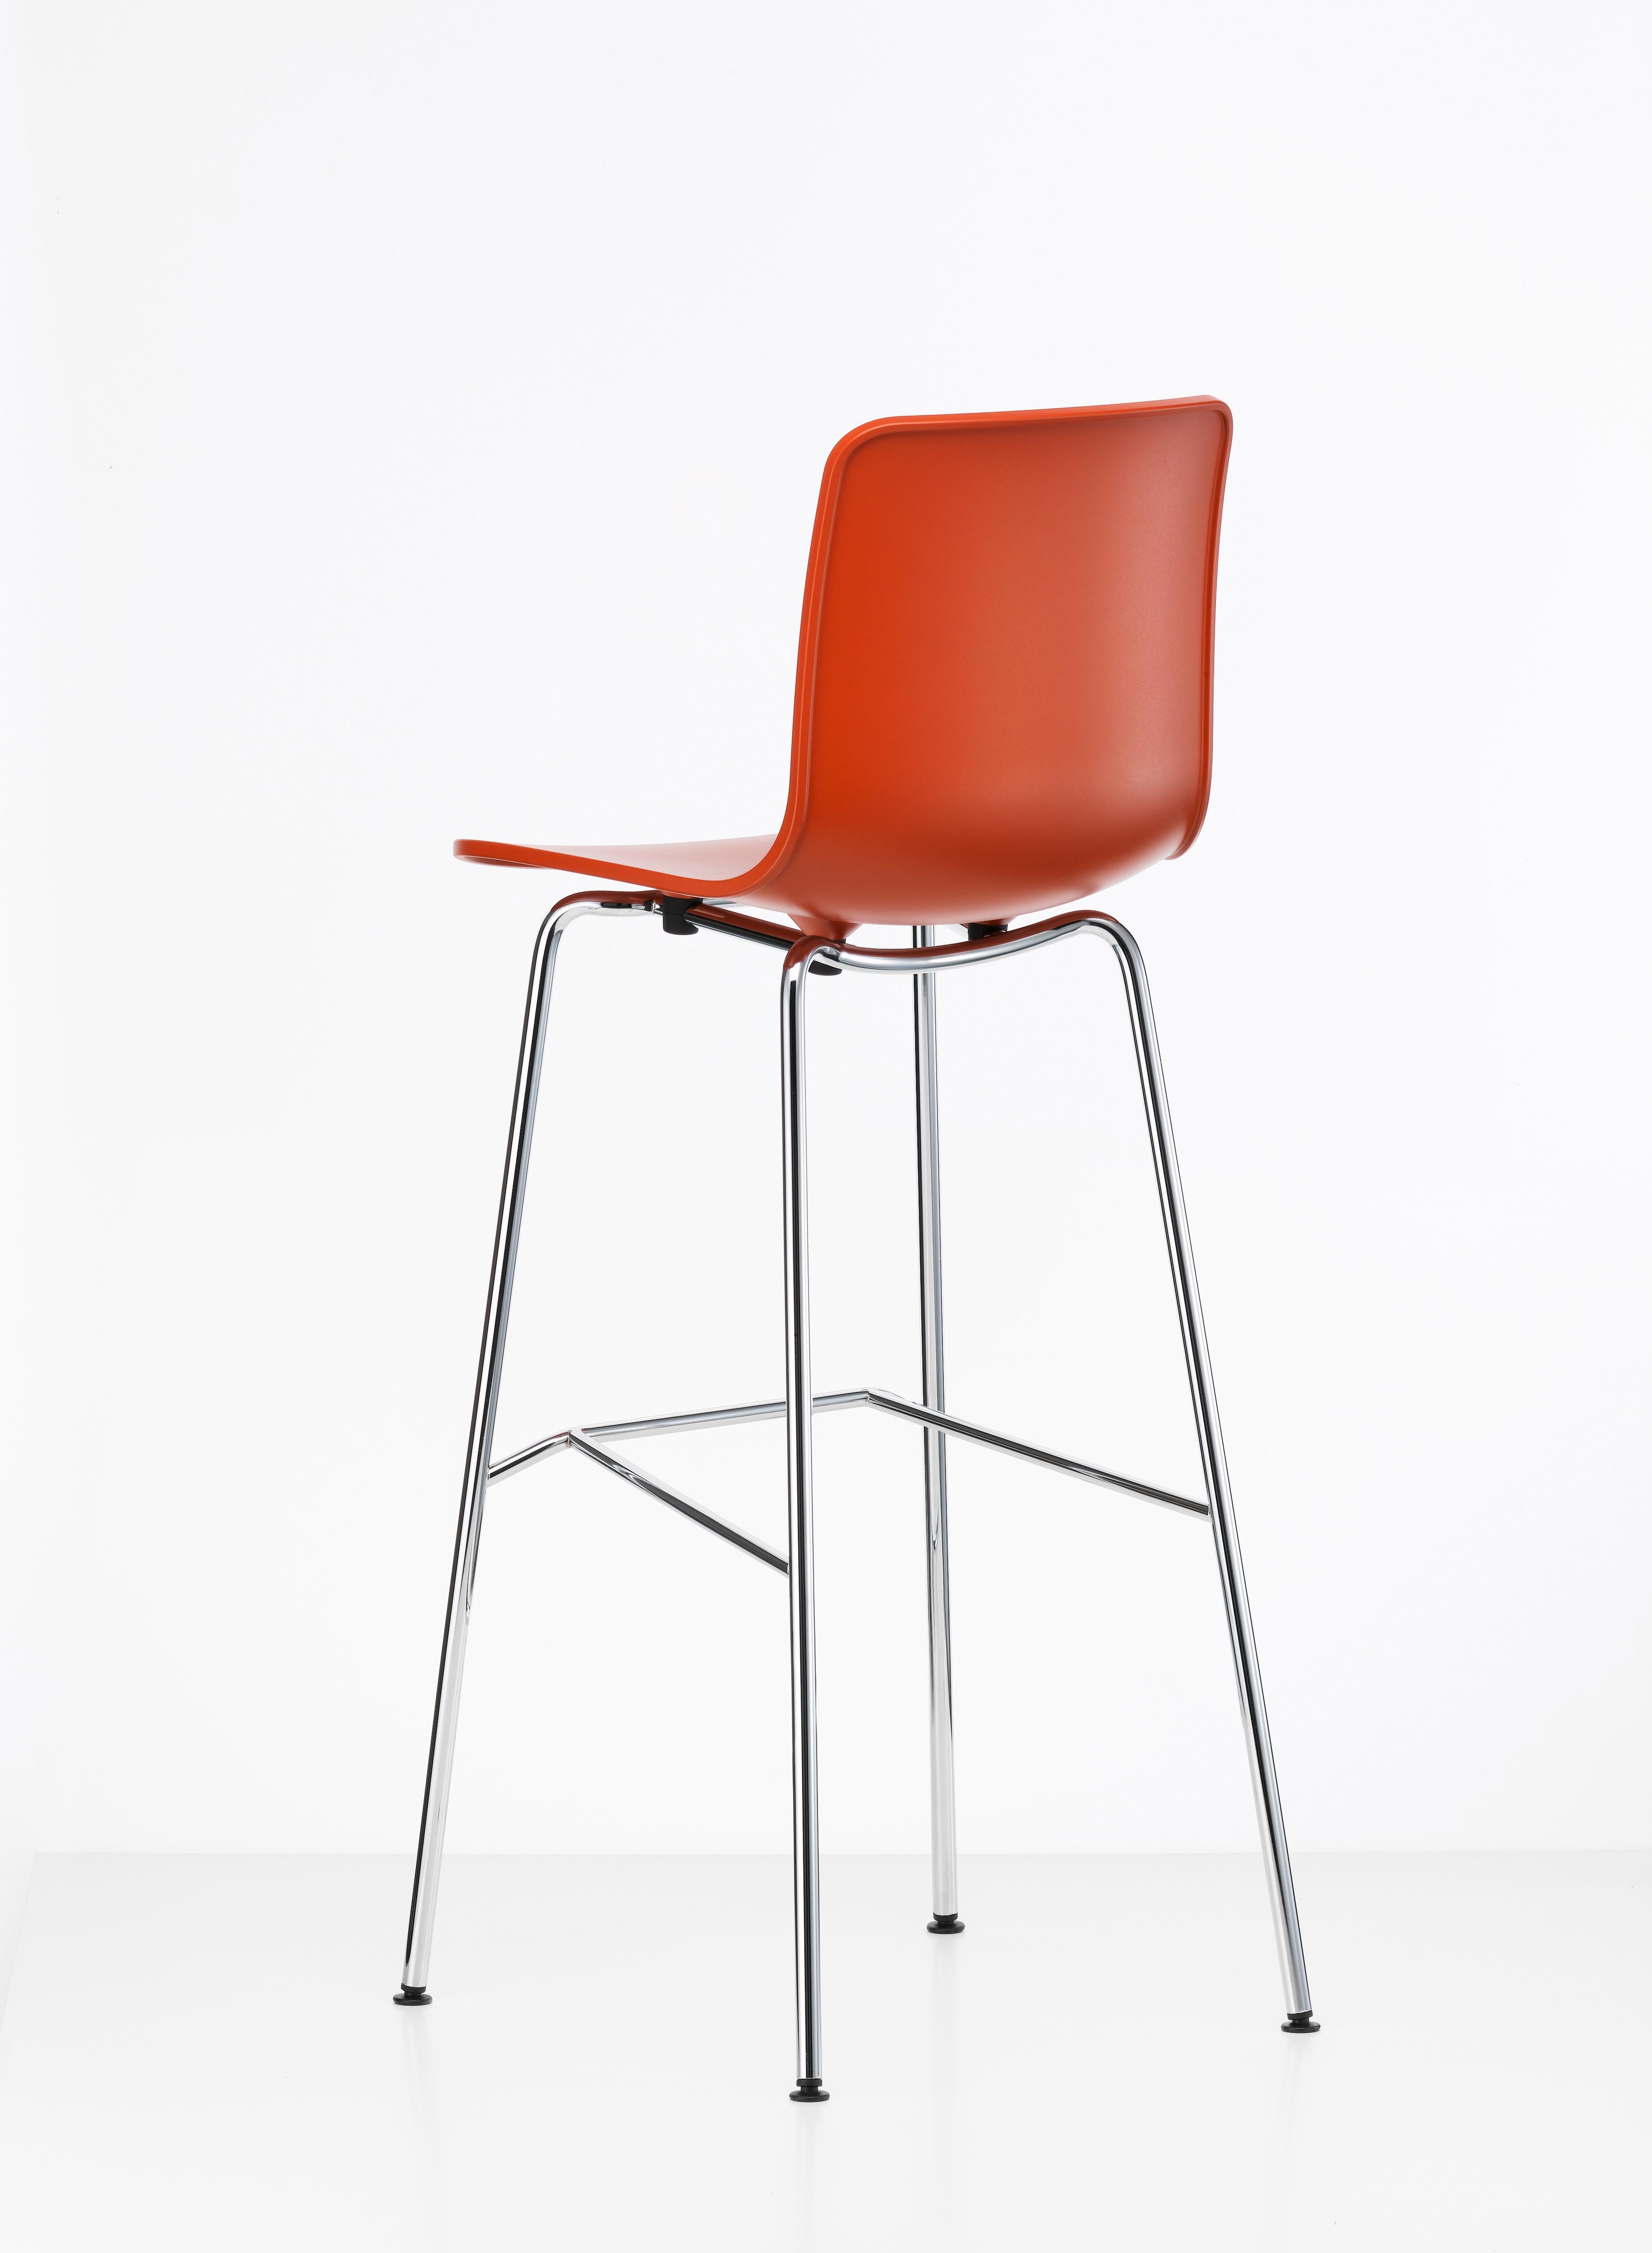 These products are only available in the United States.

The HAL Stool High is a Classic bar stool with a four-legged base at a standard height

Materials:
Seat shell: Dyed-through polypropylene
Base: Chrome-plated tubular steel with antiskid